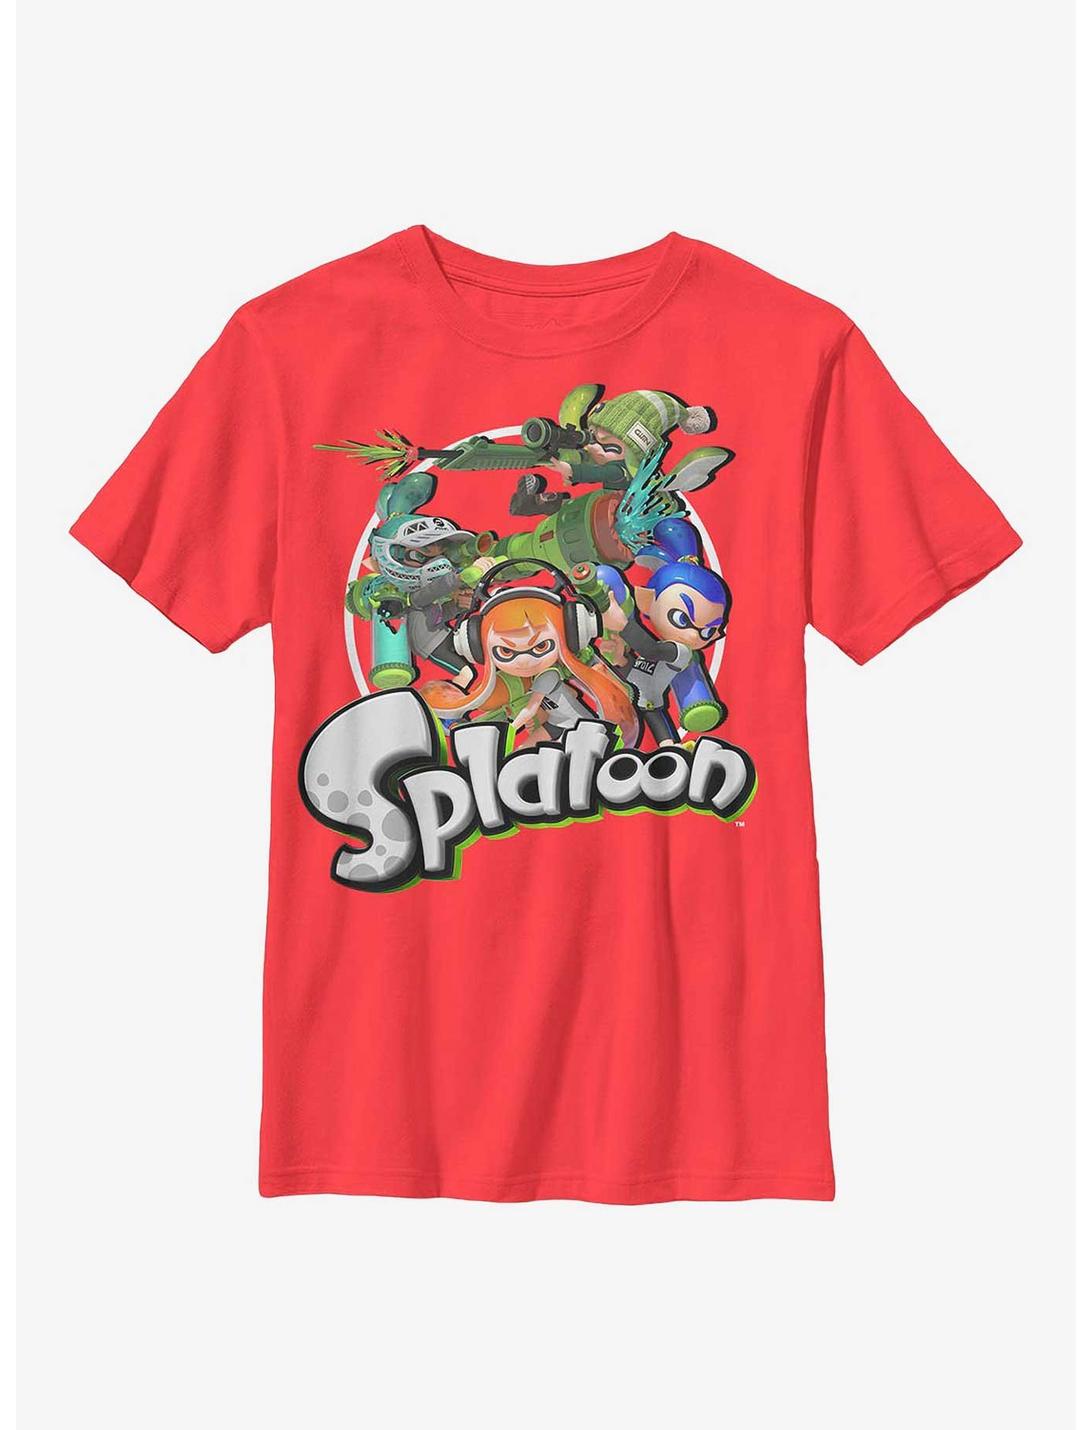 Nintendo Splatoon Character Collage Youth T-Shirt, RED, hi-res